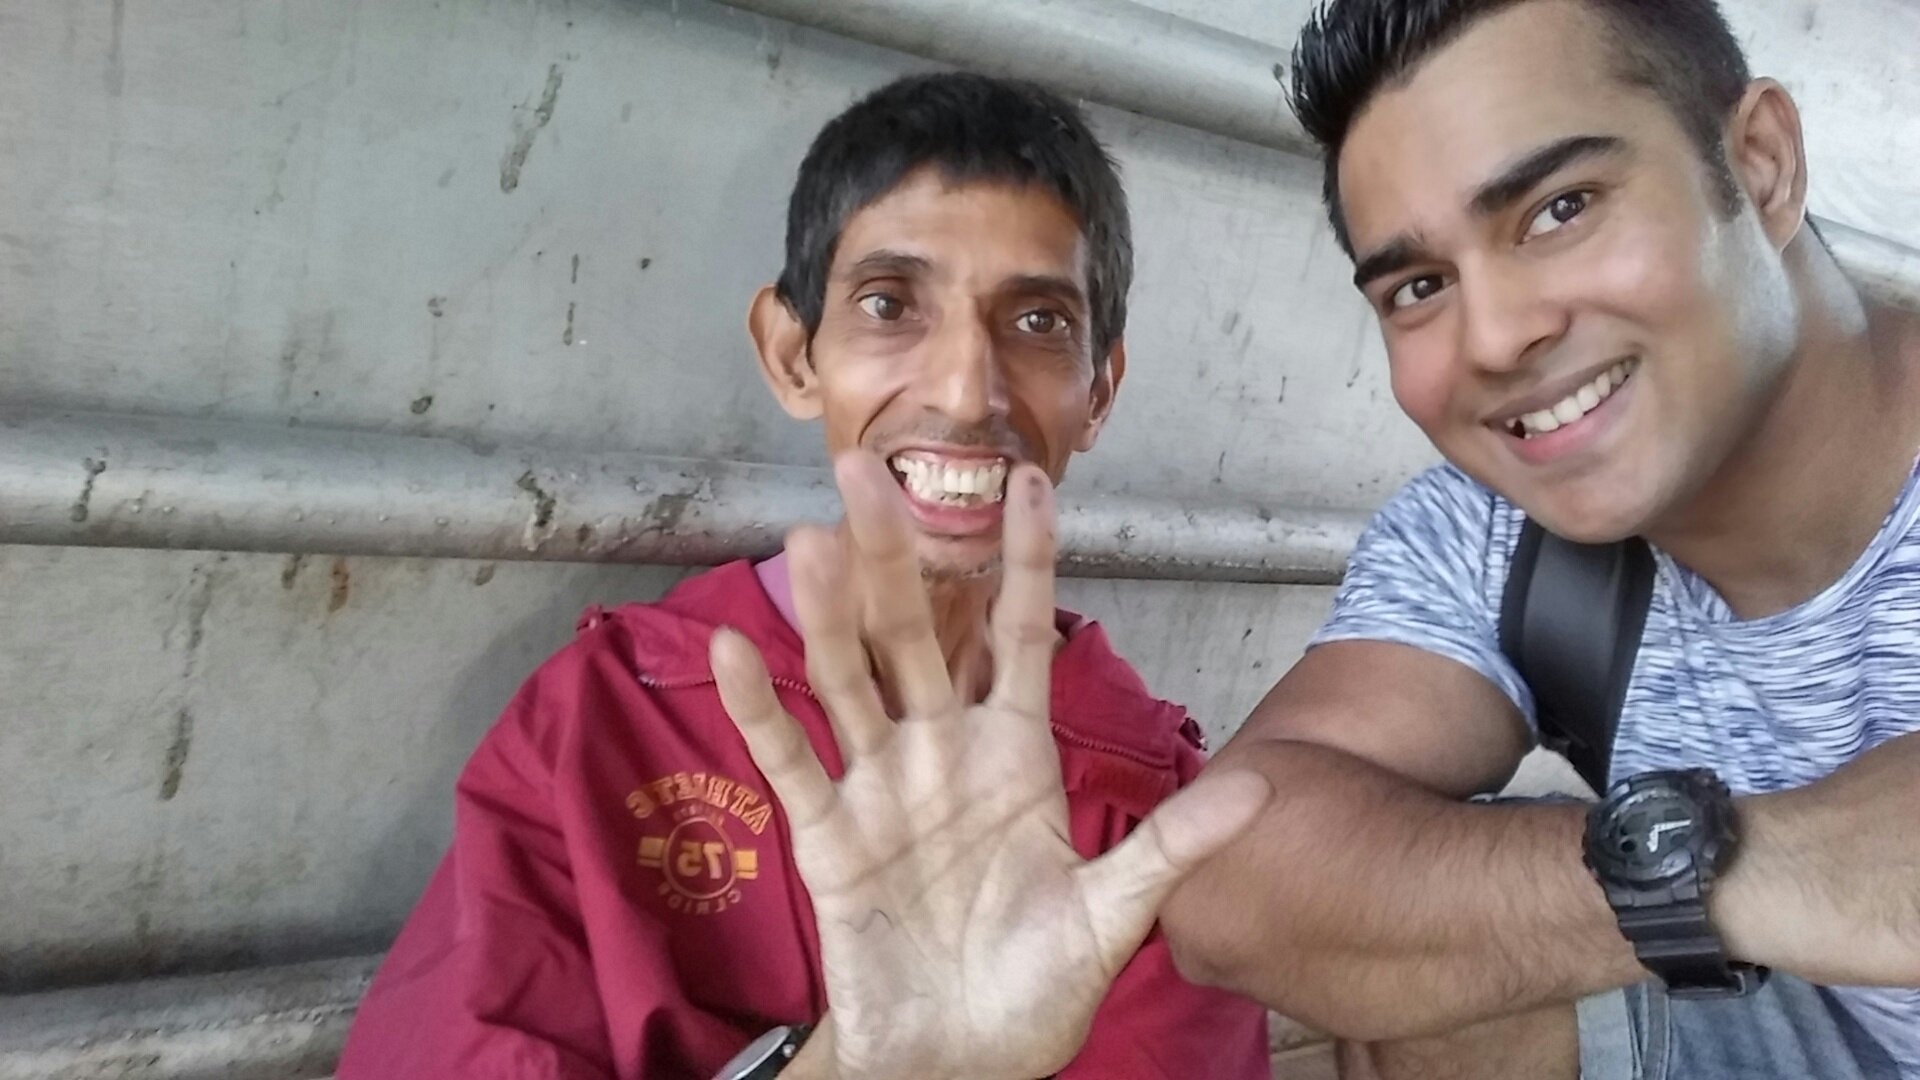 Dilip Jain - Differently Abled Man Who Surpasses Us When it Comes to Dignity and Respect